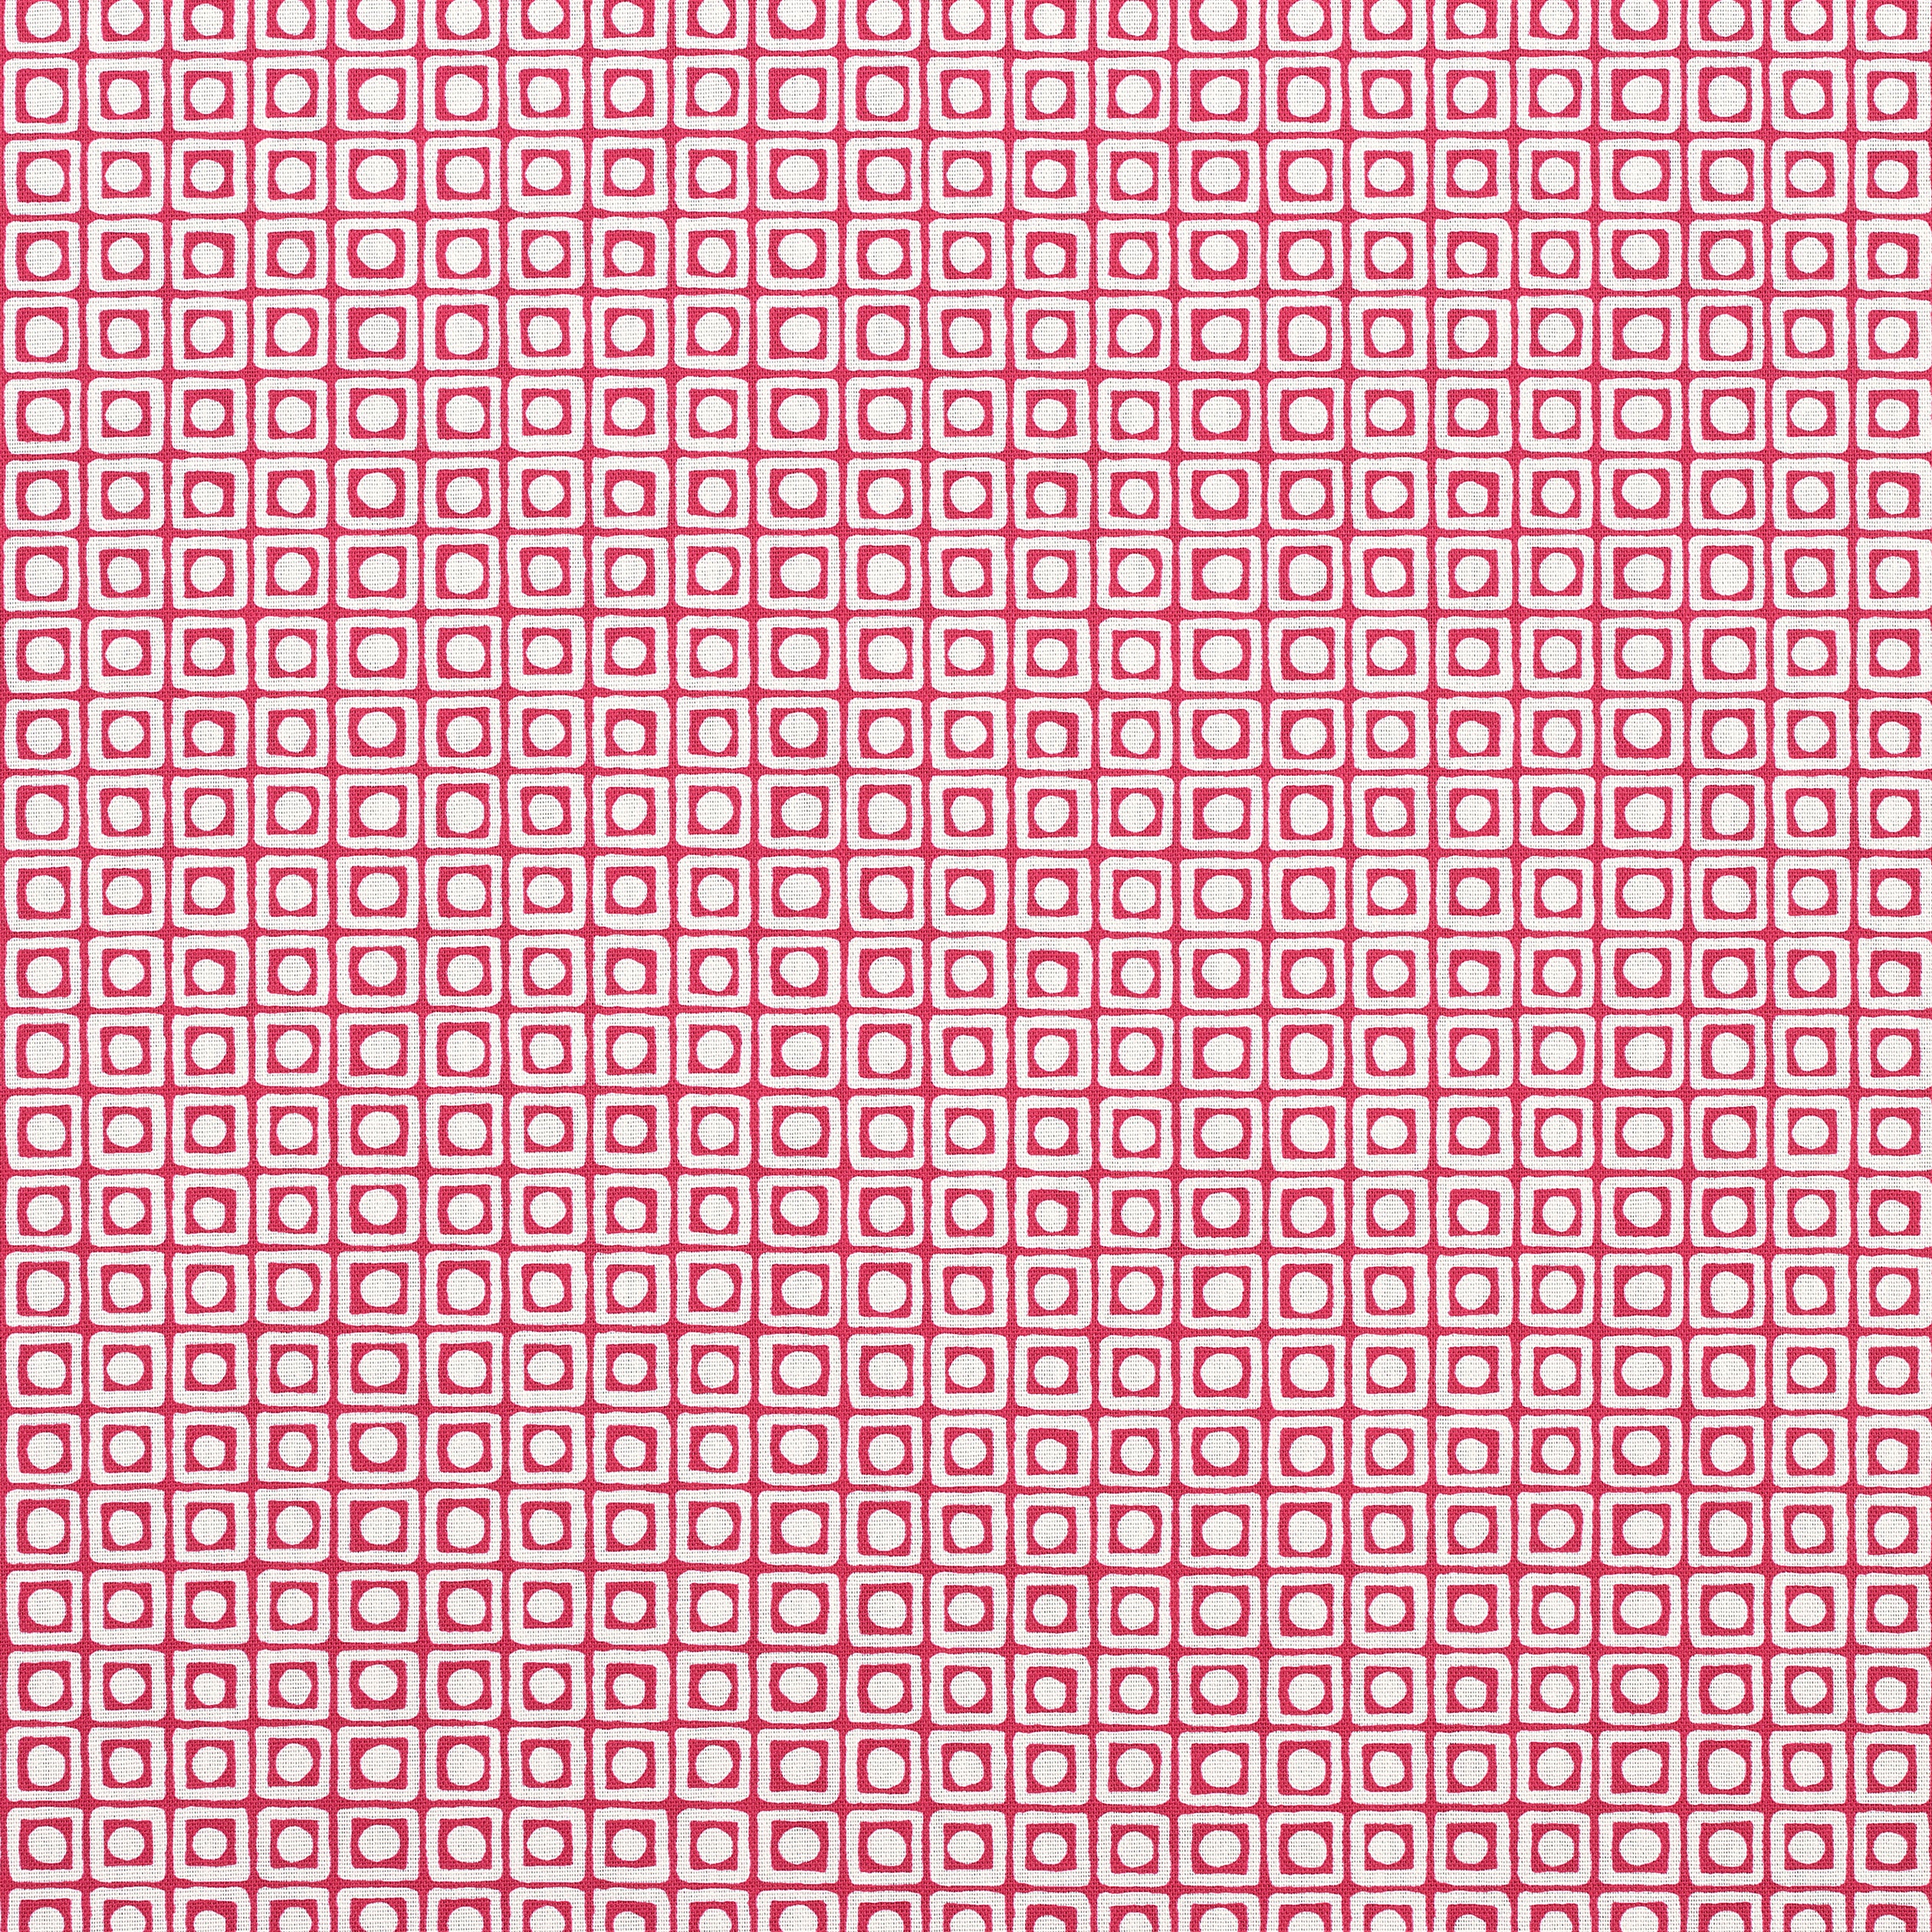 Santa Monica fabric in pink color - pattern number F913103 - by Thibaut in the Summer House collection